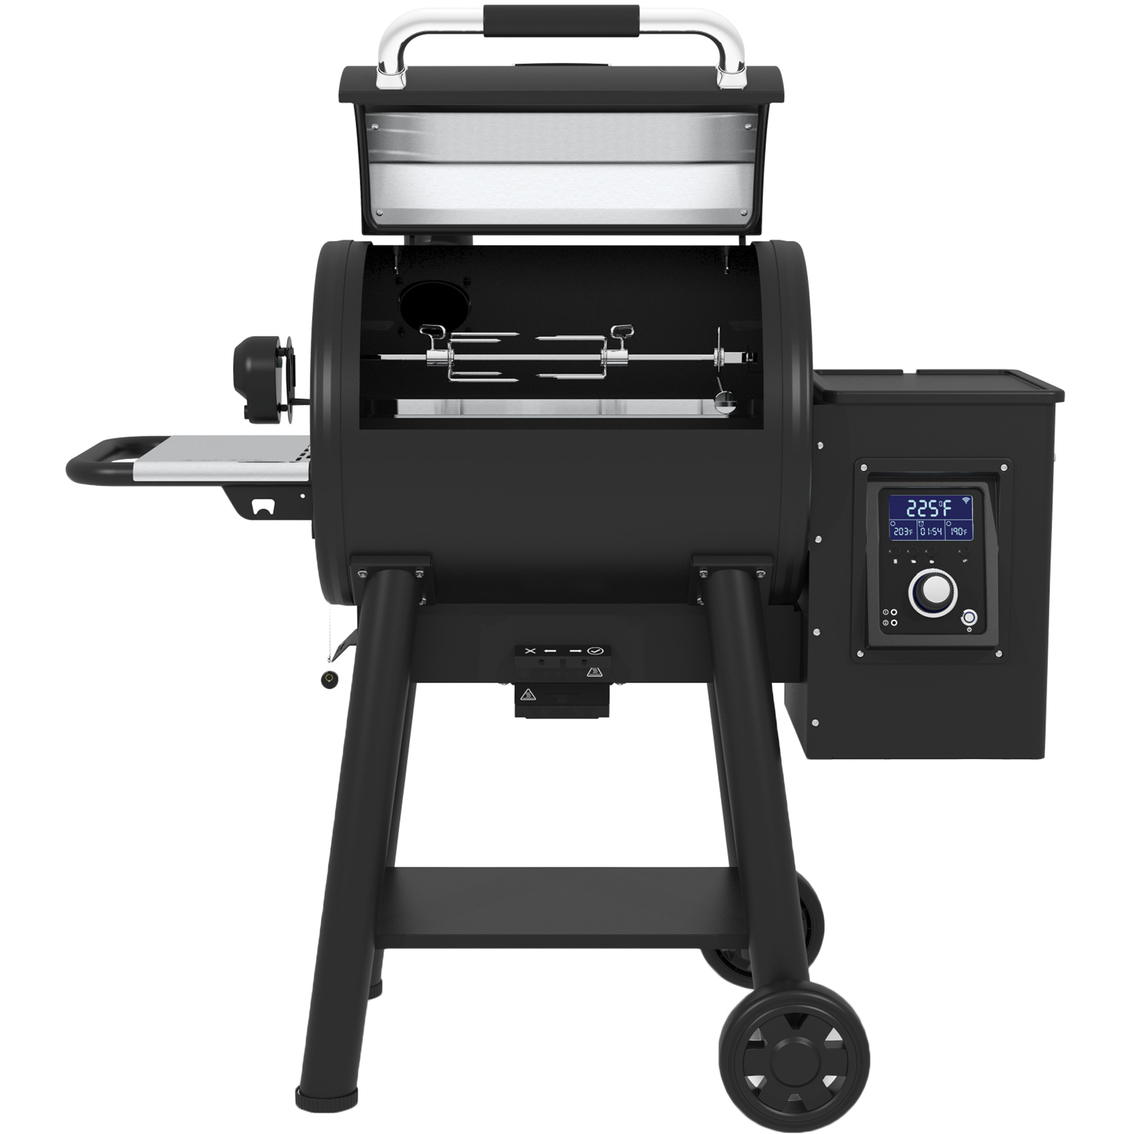 Broil King Regal WiFi Controlled Pellet 400 Grill - Image 5 of 10